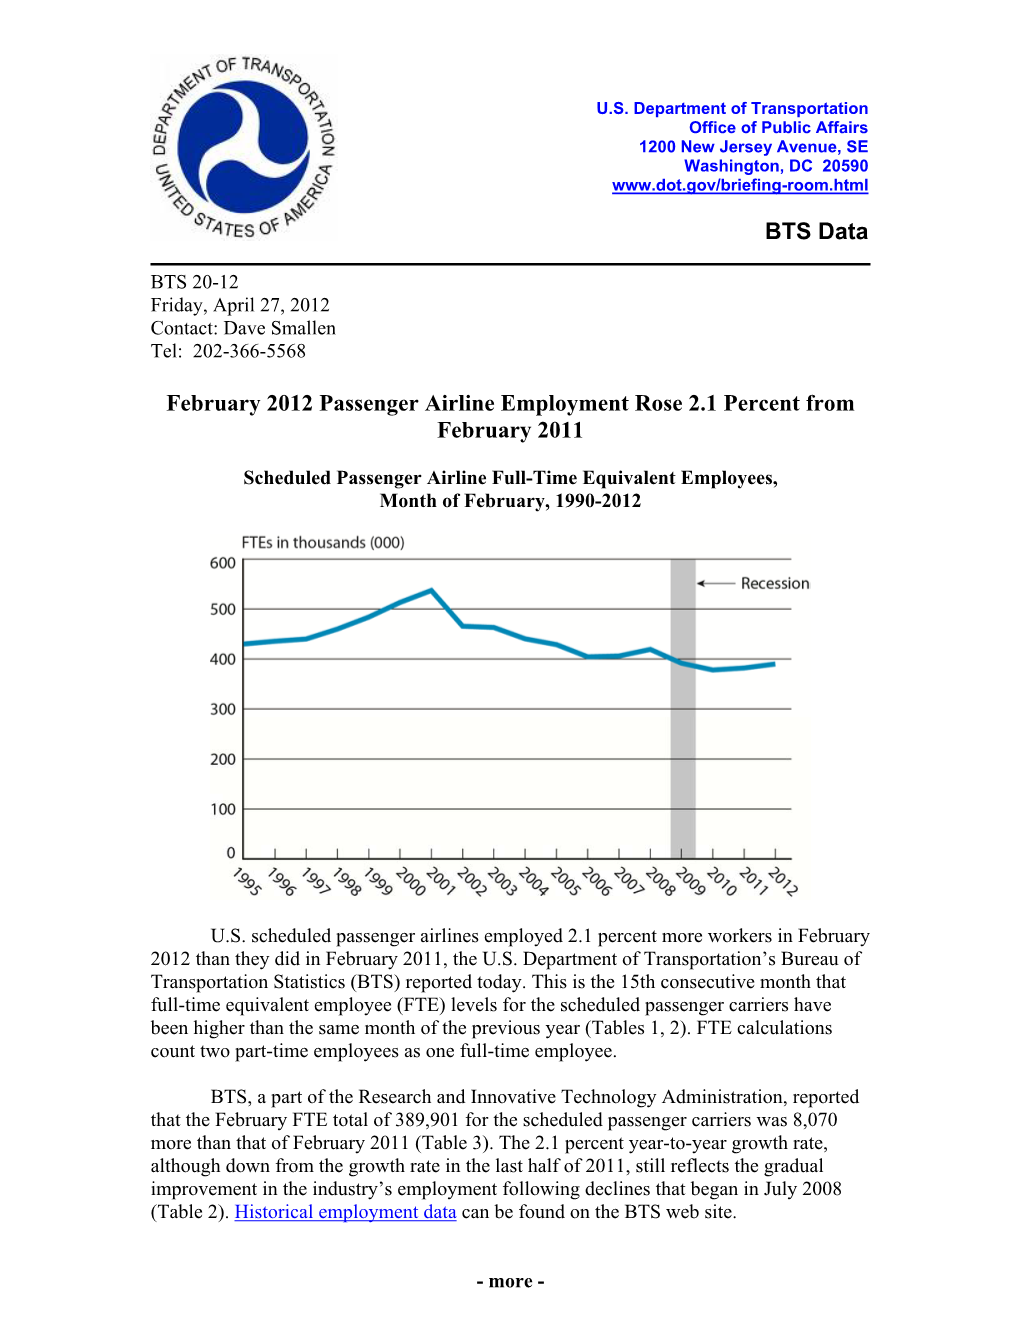 February 2012 Passenger Airline Employment Rose 2.1 Percent from February 2011